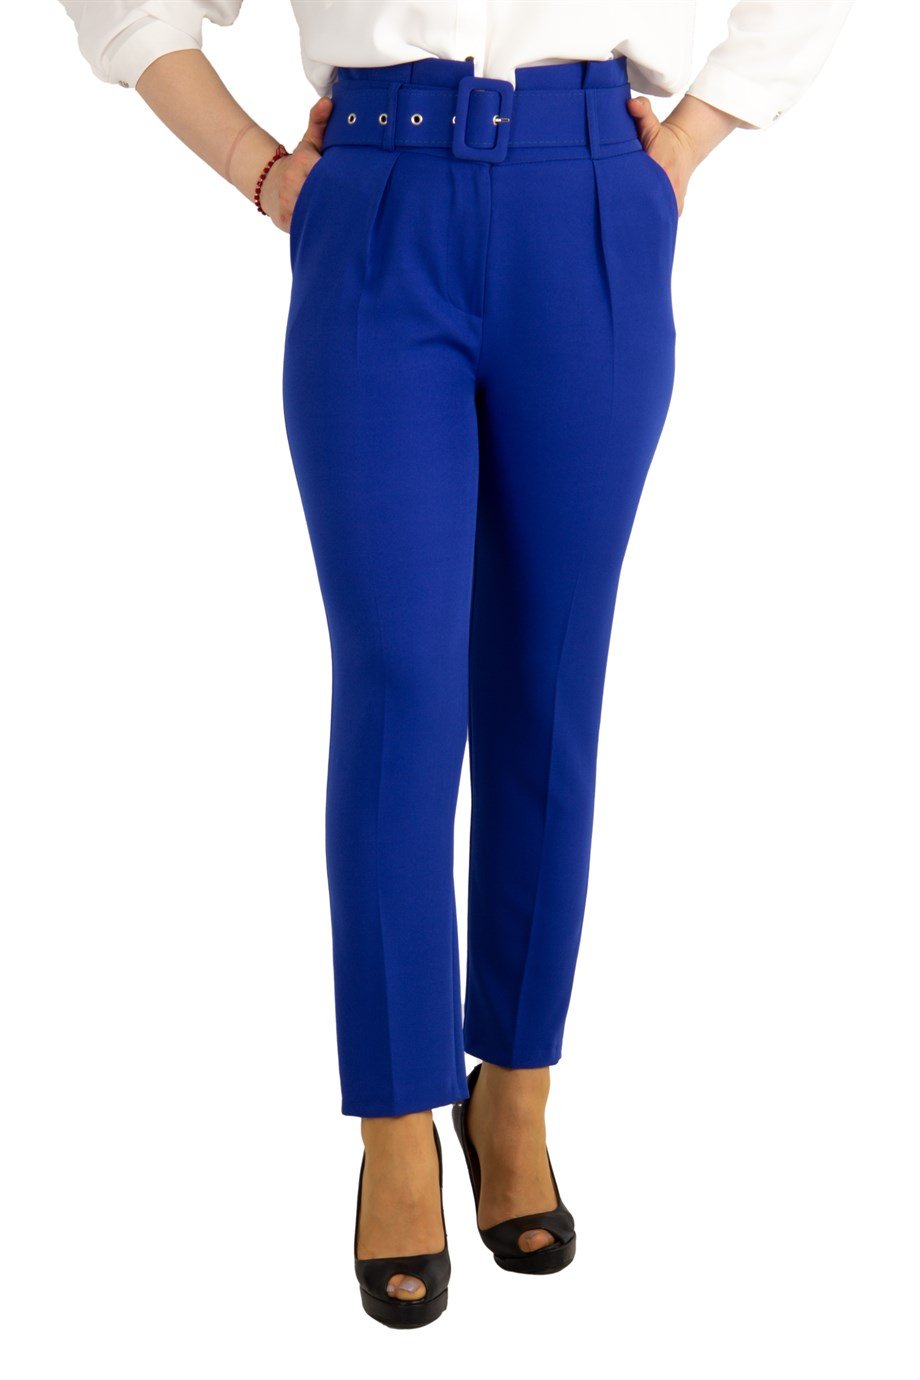  YOLAI Women Workplace Trousers with Belt Casual